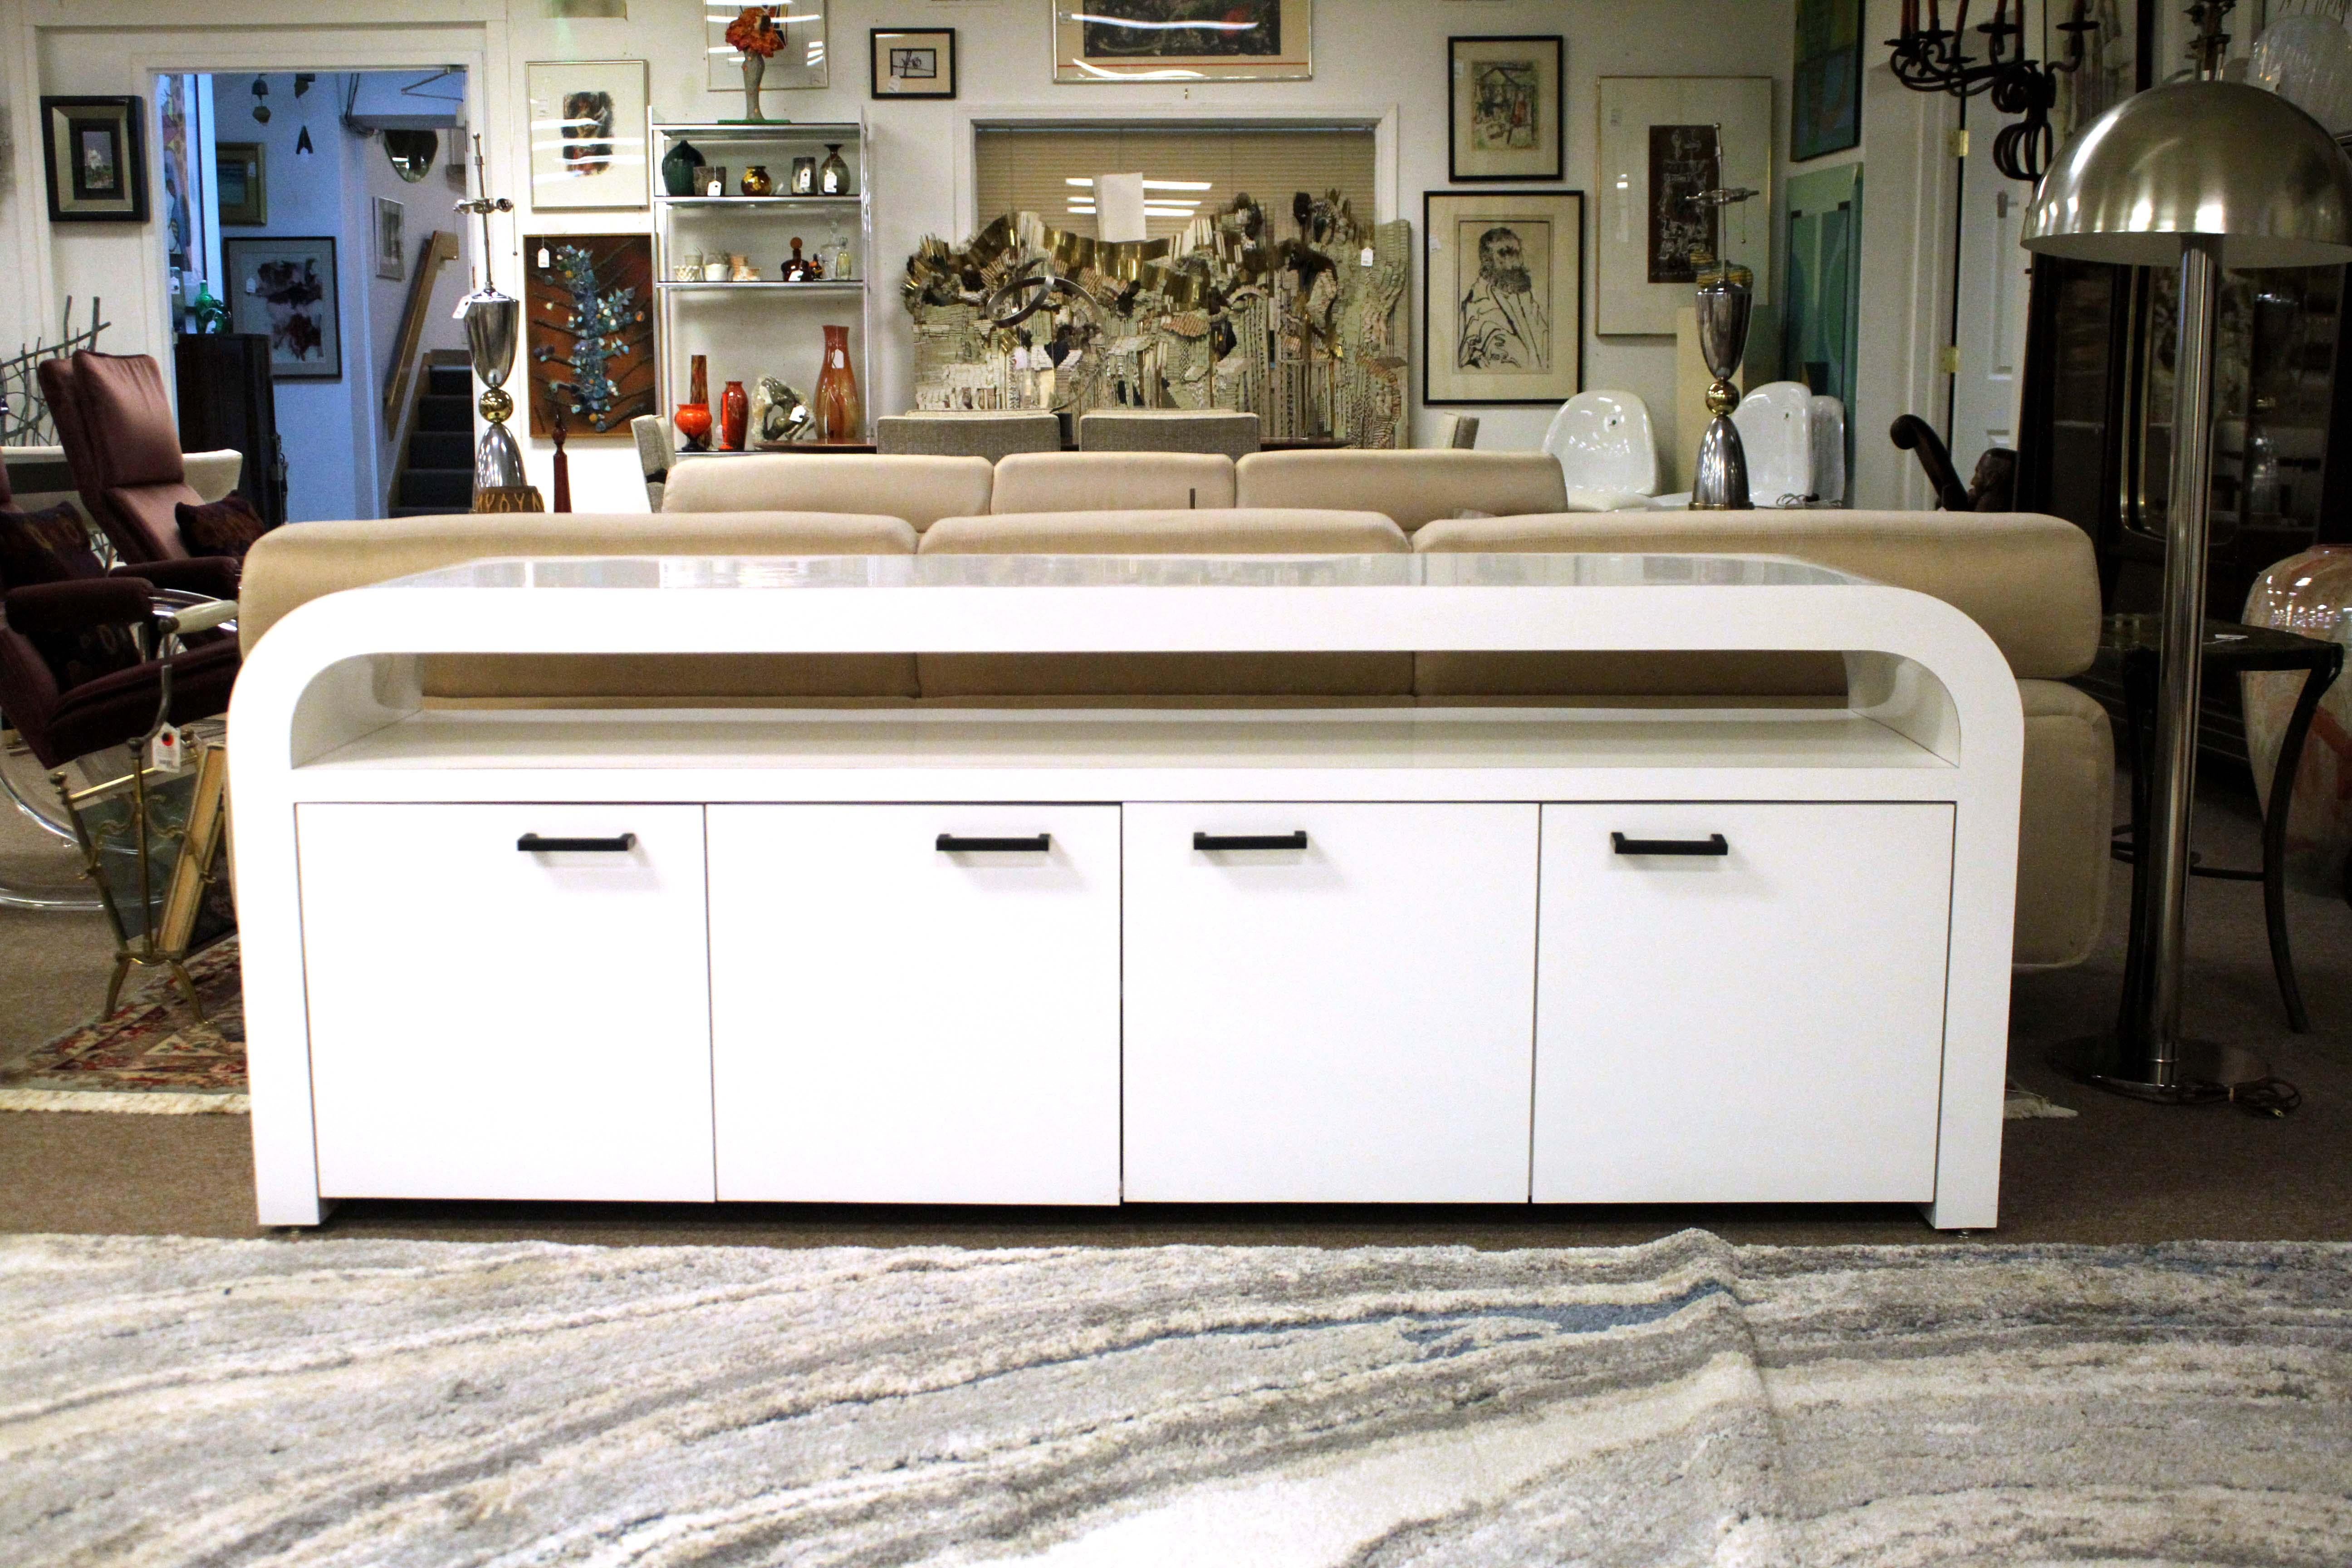 This contemporary custom made curved white lacquer credenza is a stunning piece of furniture that will be the centerpiece of any room. Its unique curved design gives it an unmistakable modern style that will fit perfectly in any modern home. The